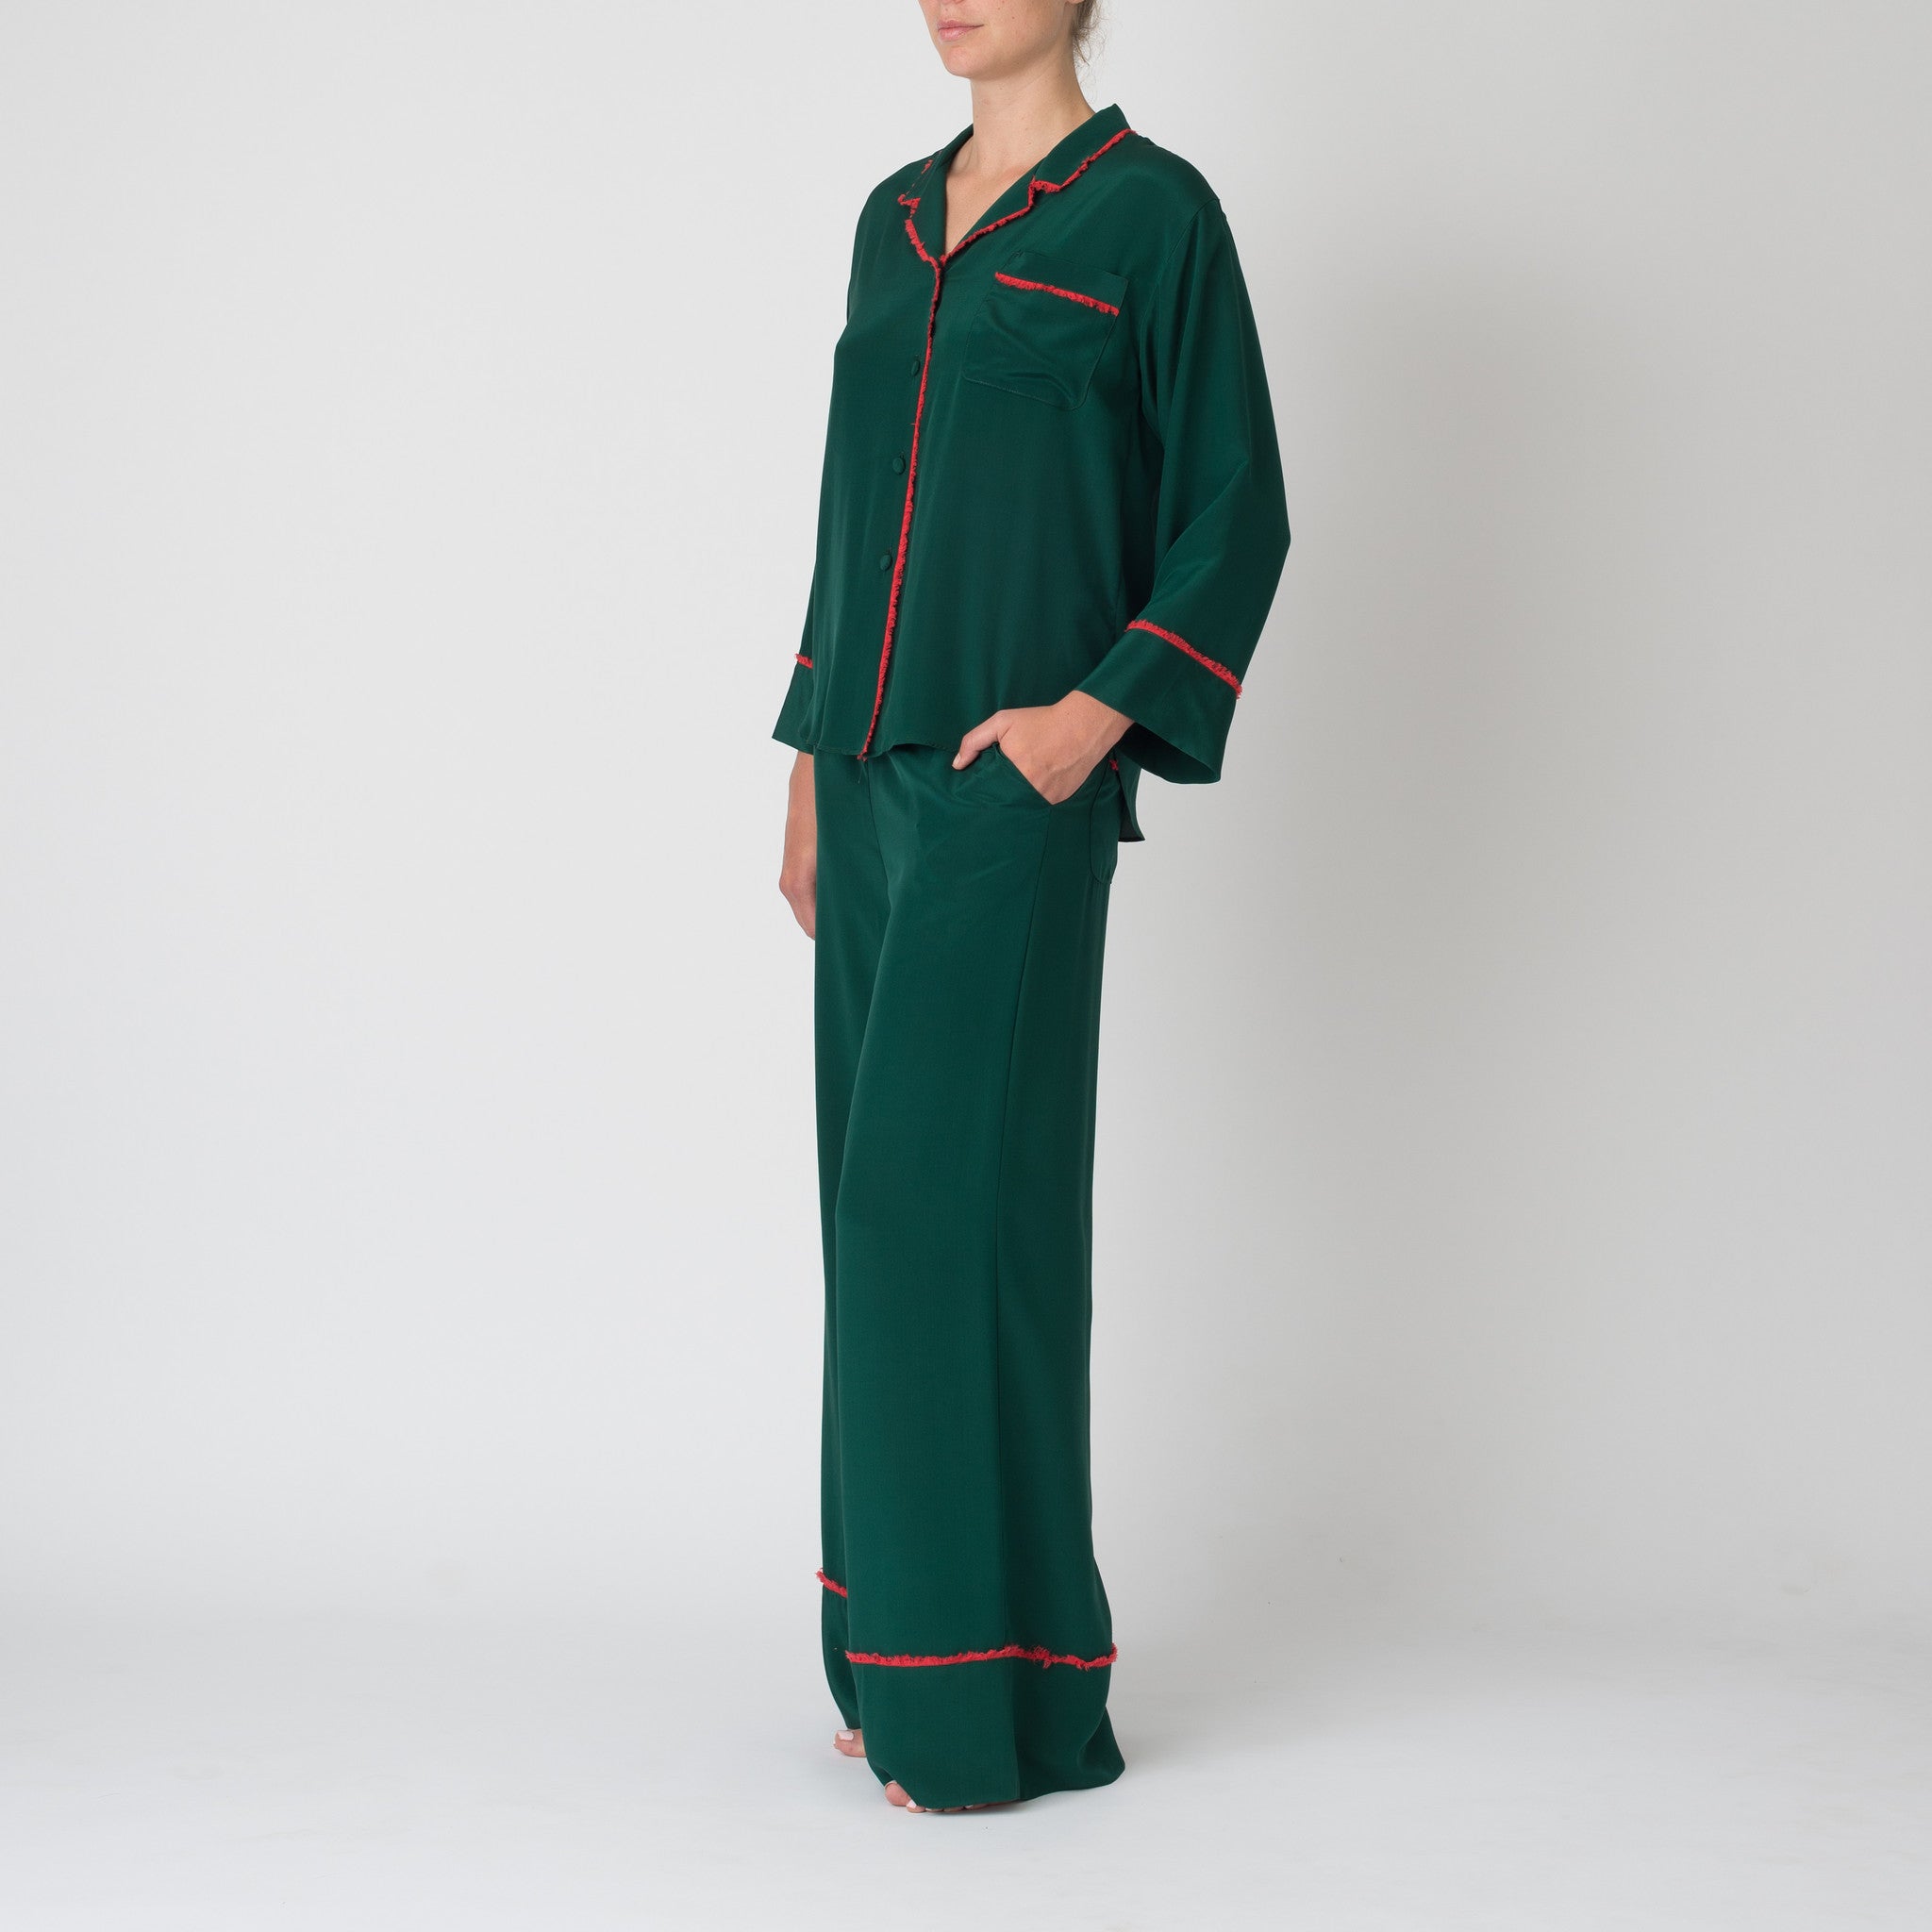 Matisse in Emerald with Coral Fringe